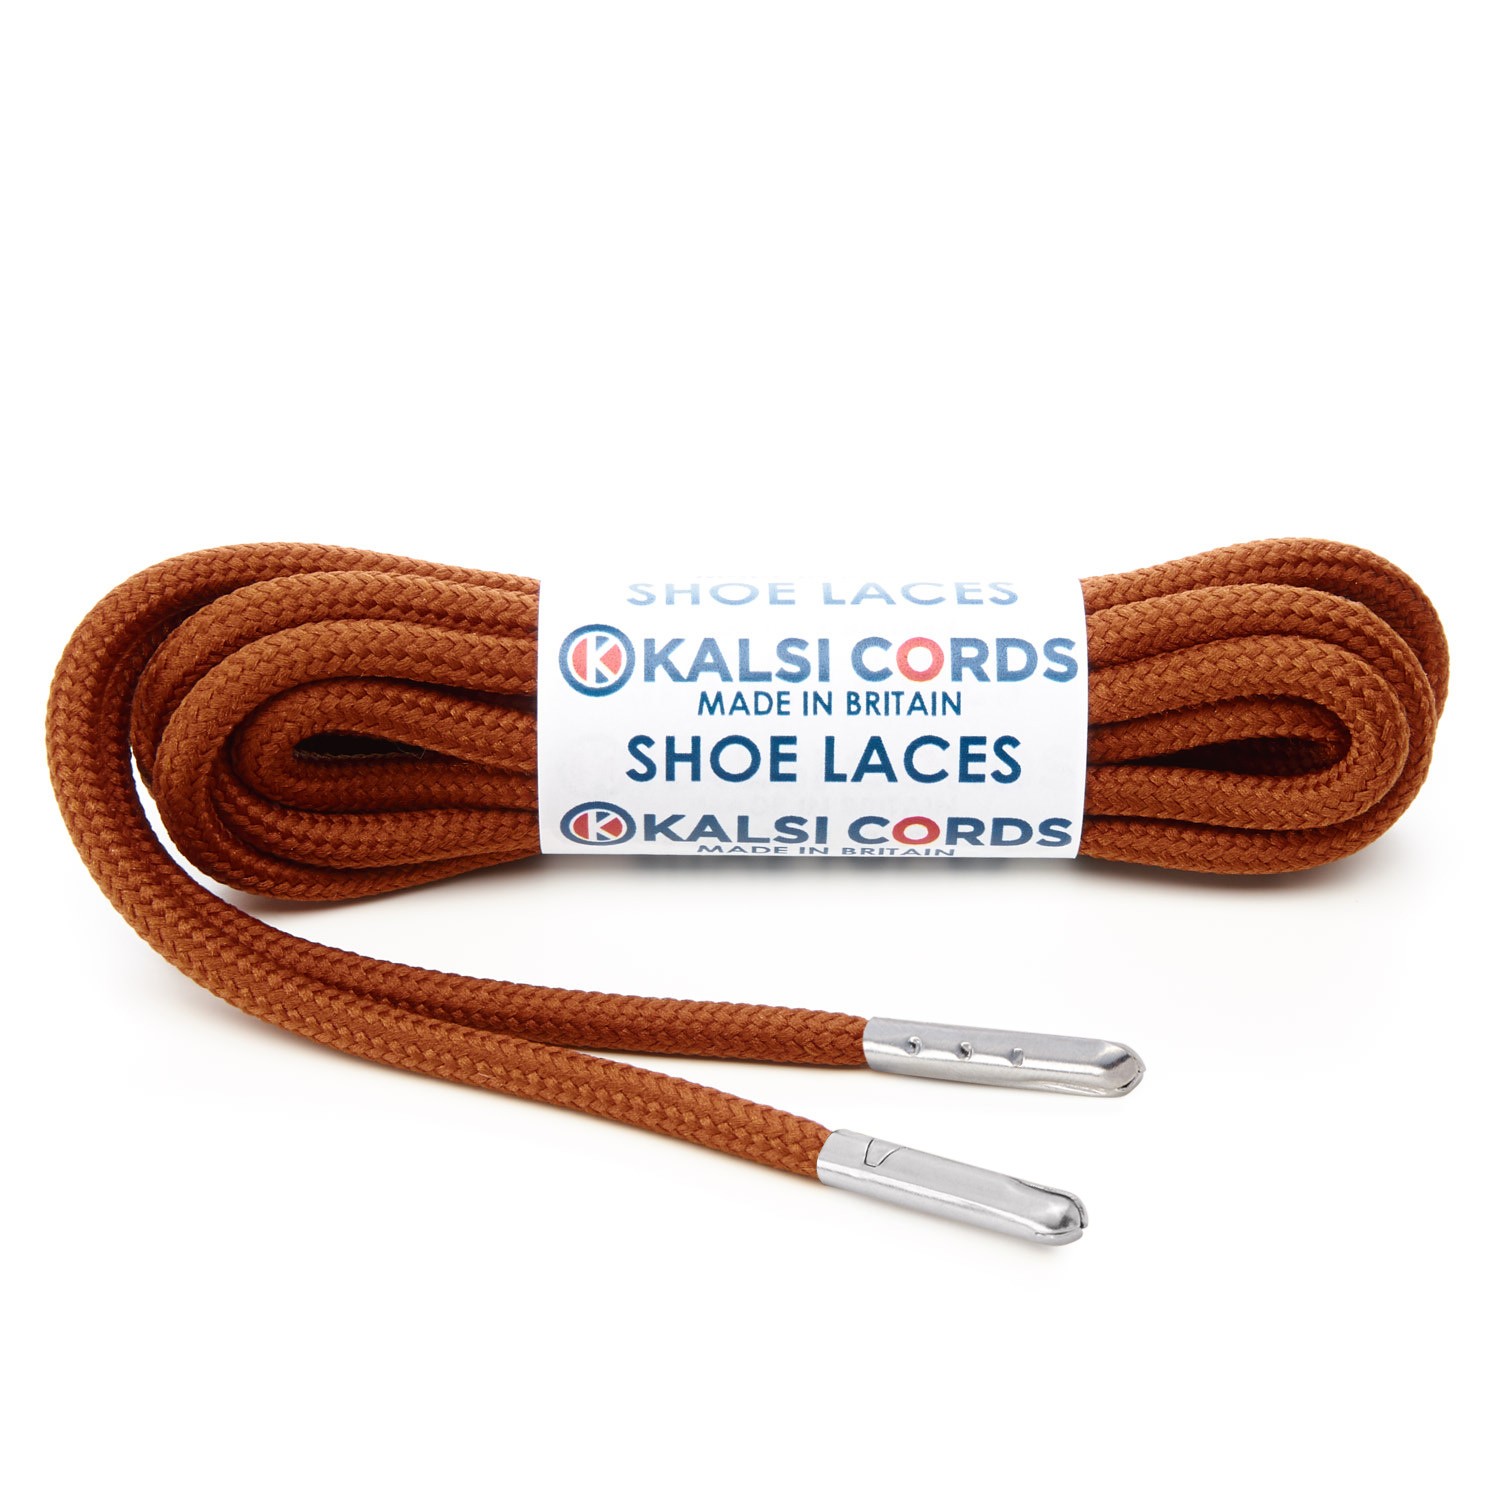 T621 5mm Round Polyester Shoe Laces Nutmeg 1 Silver Metal Tip Kalsi Cords